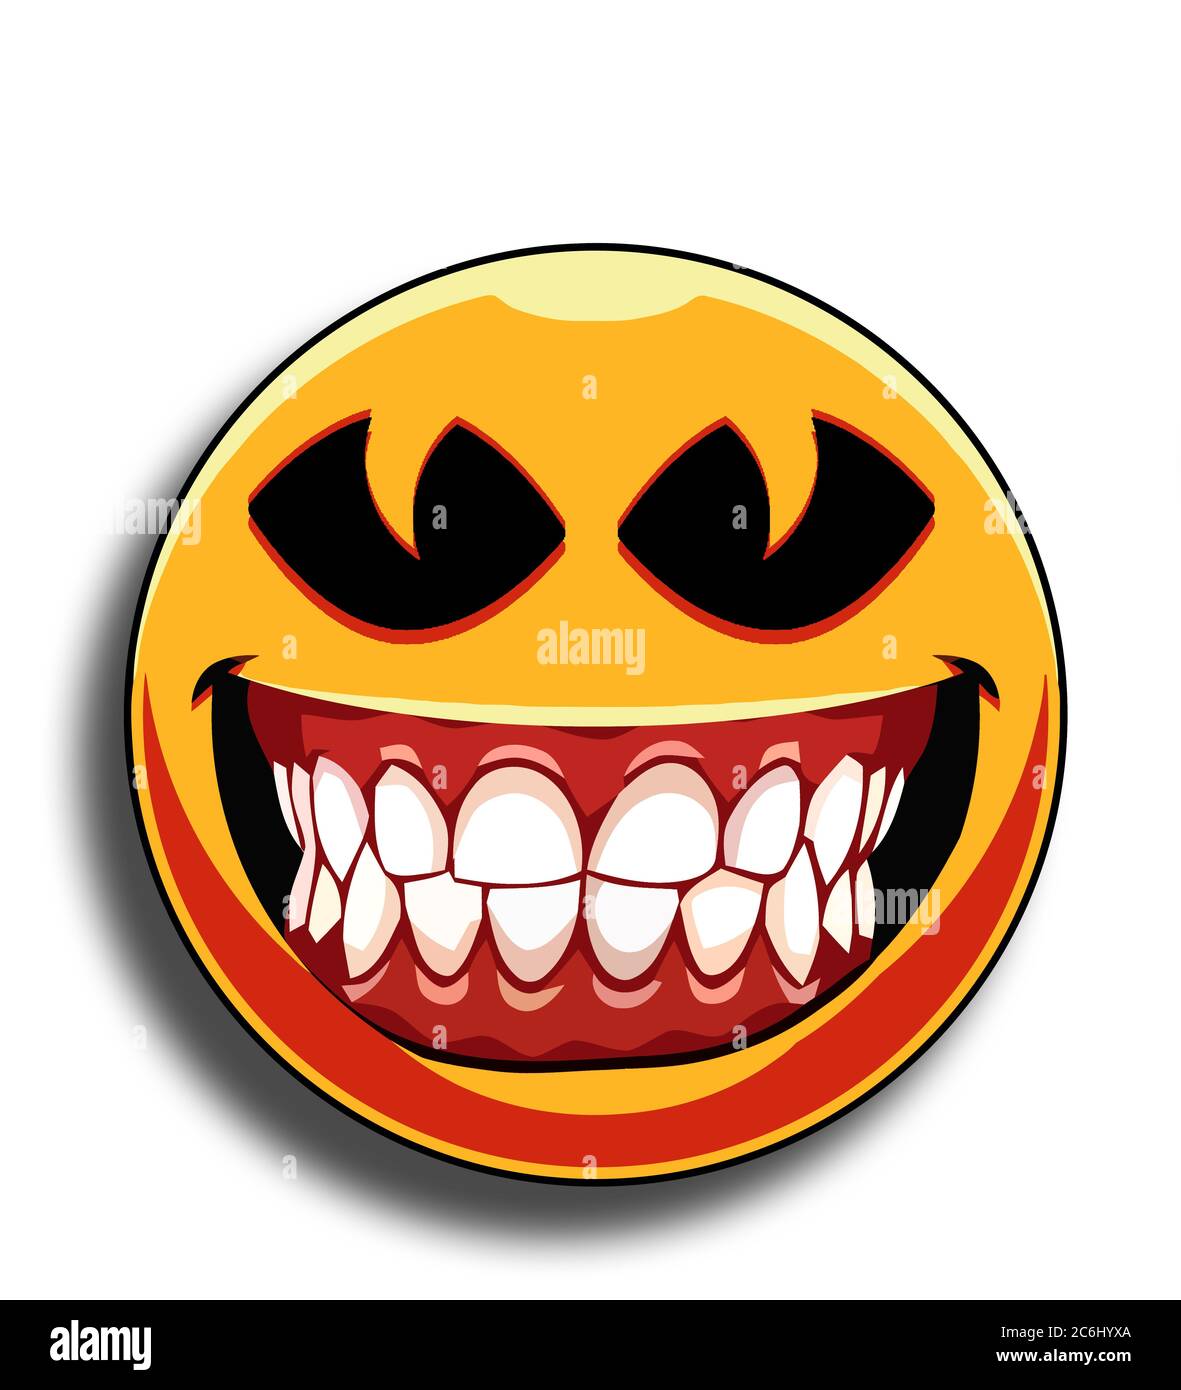 Smile emoji Cut Out Stock Images & Pictures - Alamy